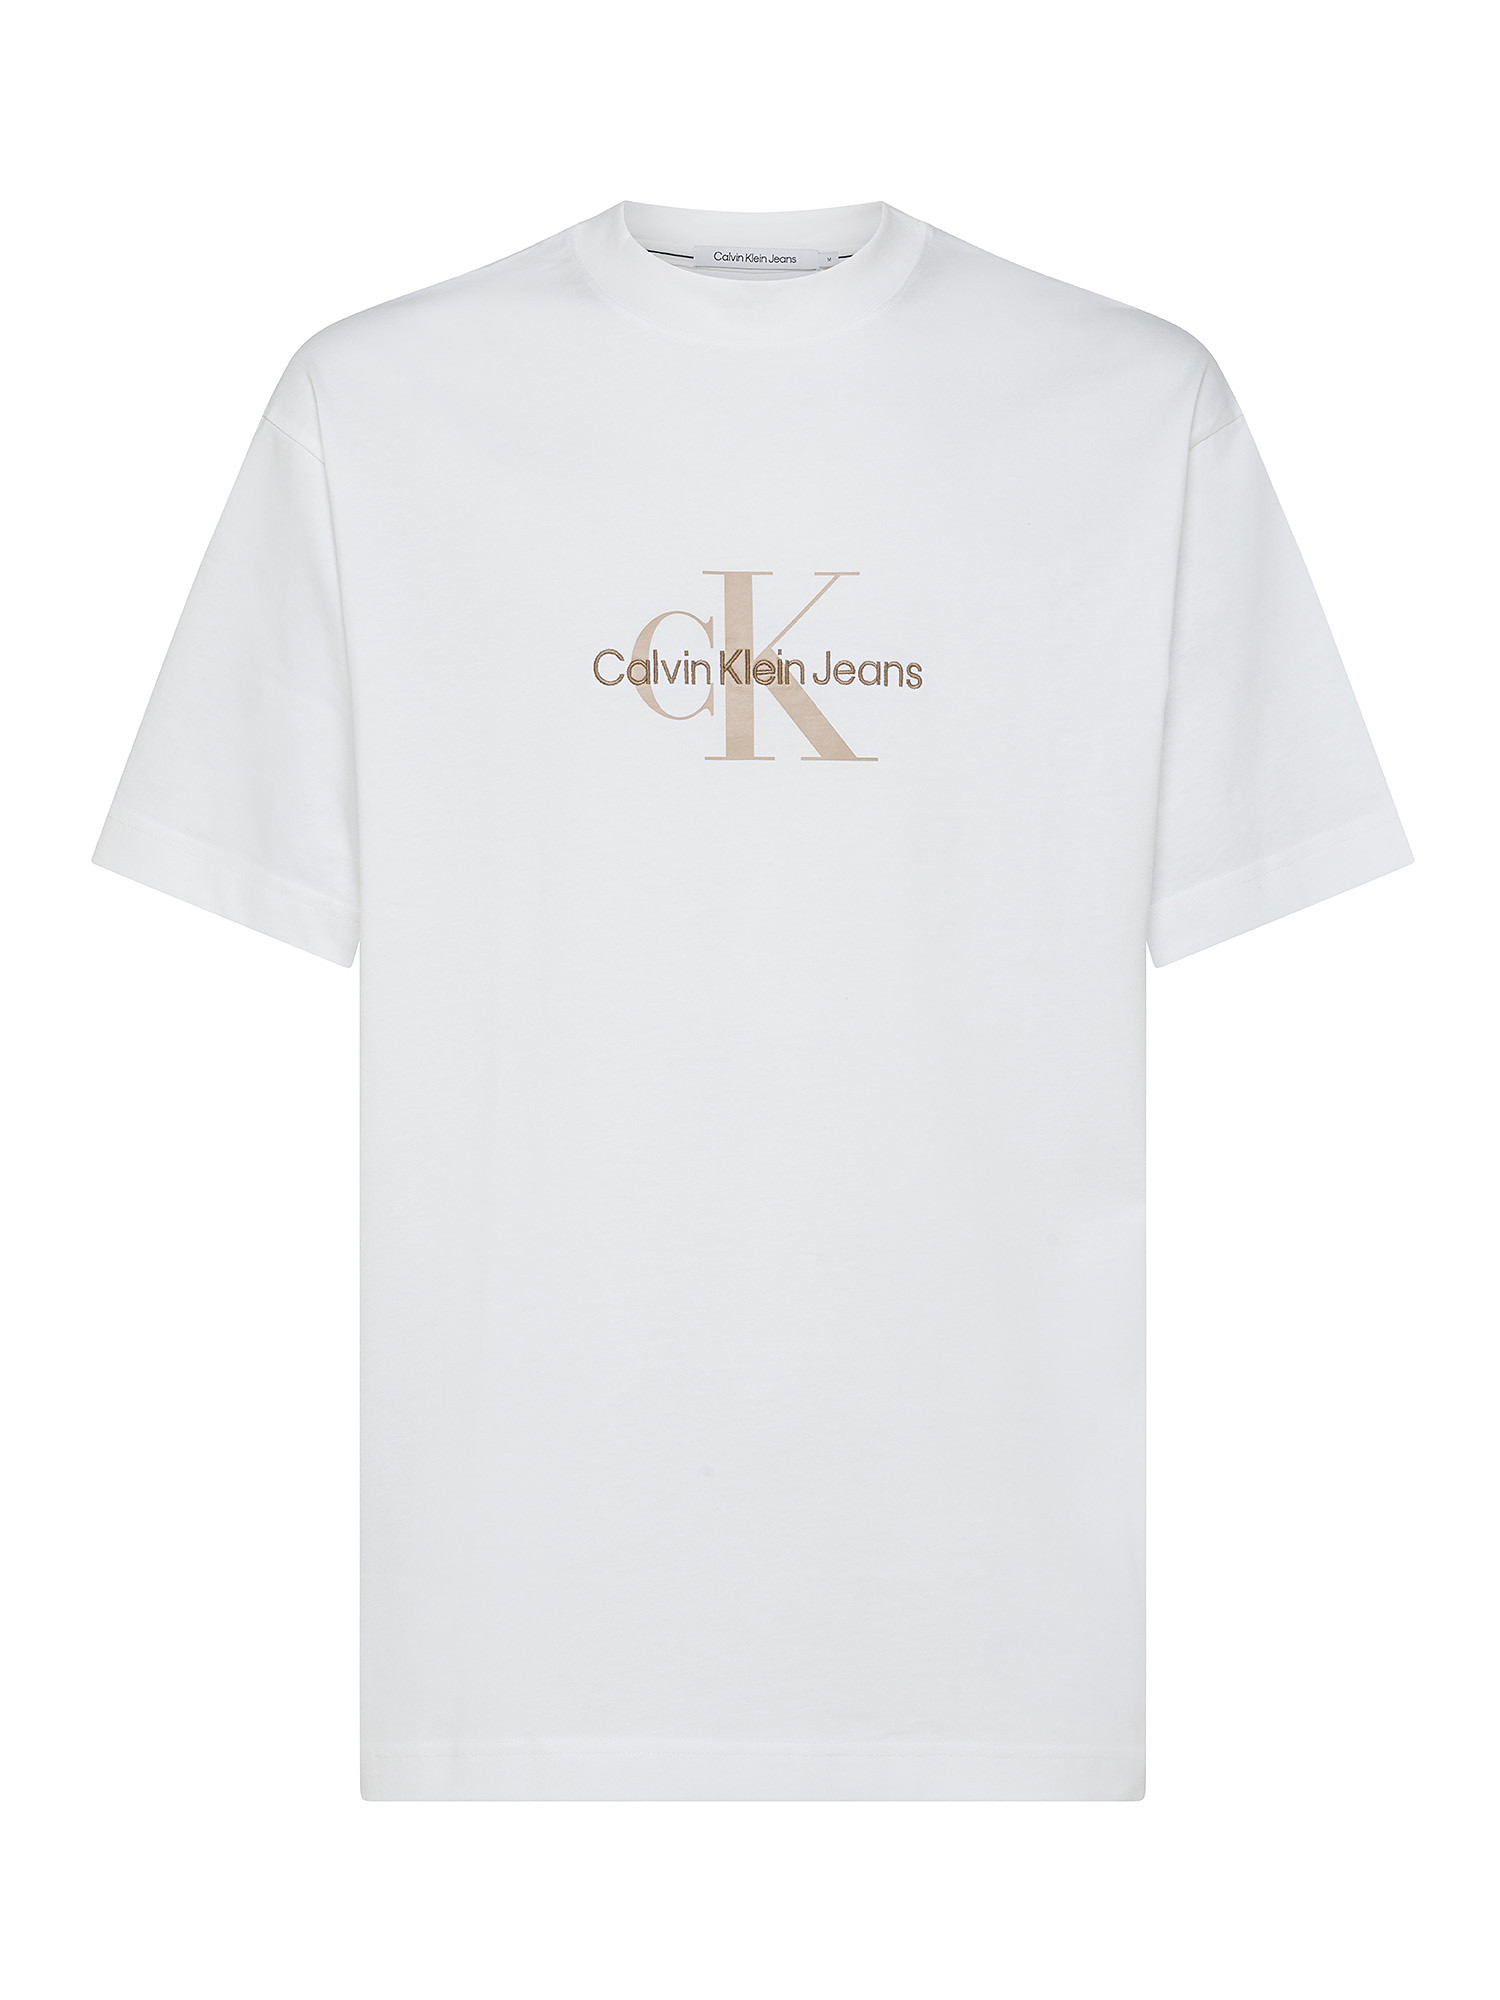 Calvin Klein Jeans - Oversized cotton T-shirt with logo, White, large image number 0